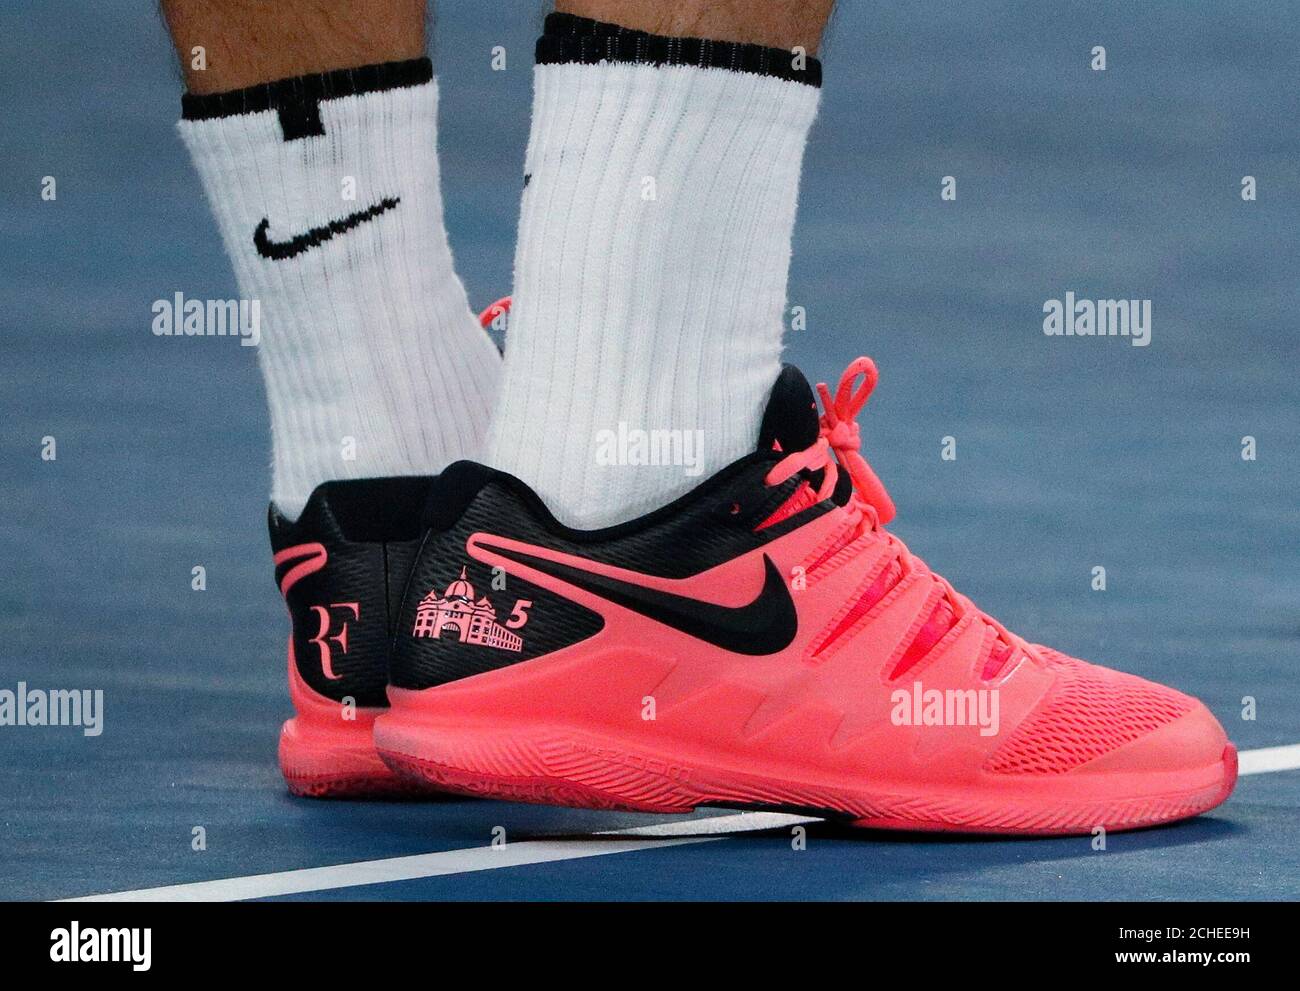 Tennis - Australian Open - Quarterfinals - Rod Laver Arena, Melbourne,  Australia, January 24, 2018. The shoes of Roger Federer of Switzerland are  pictured as he is interviewed on court after winning